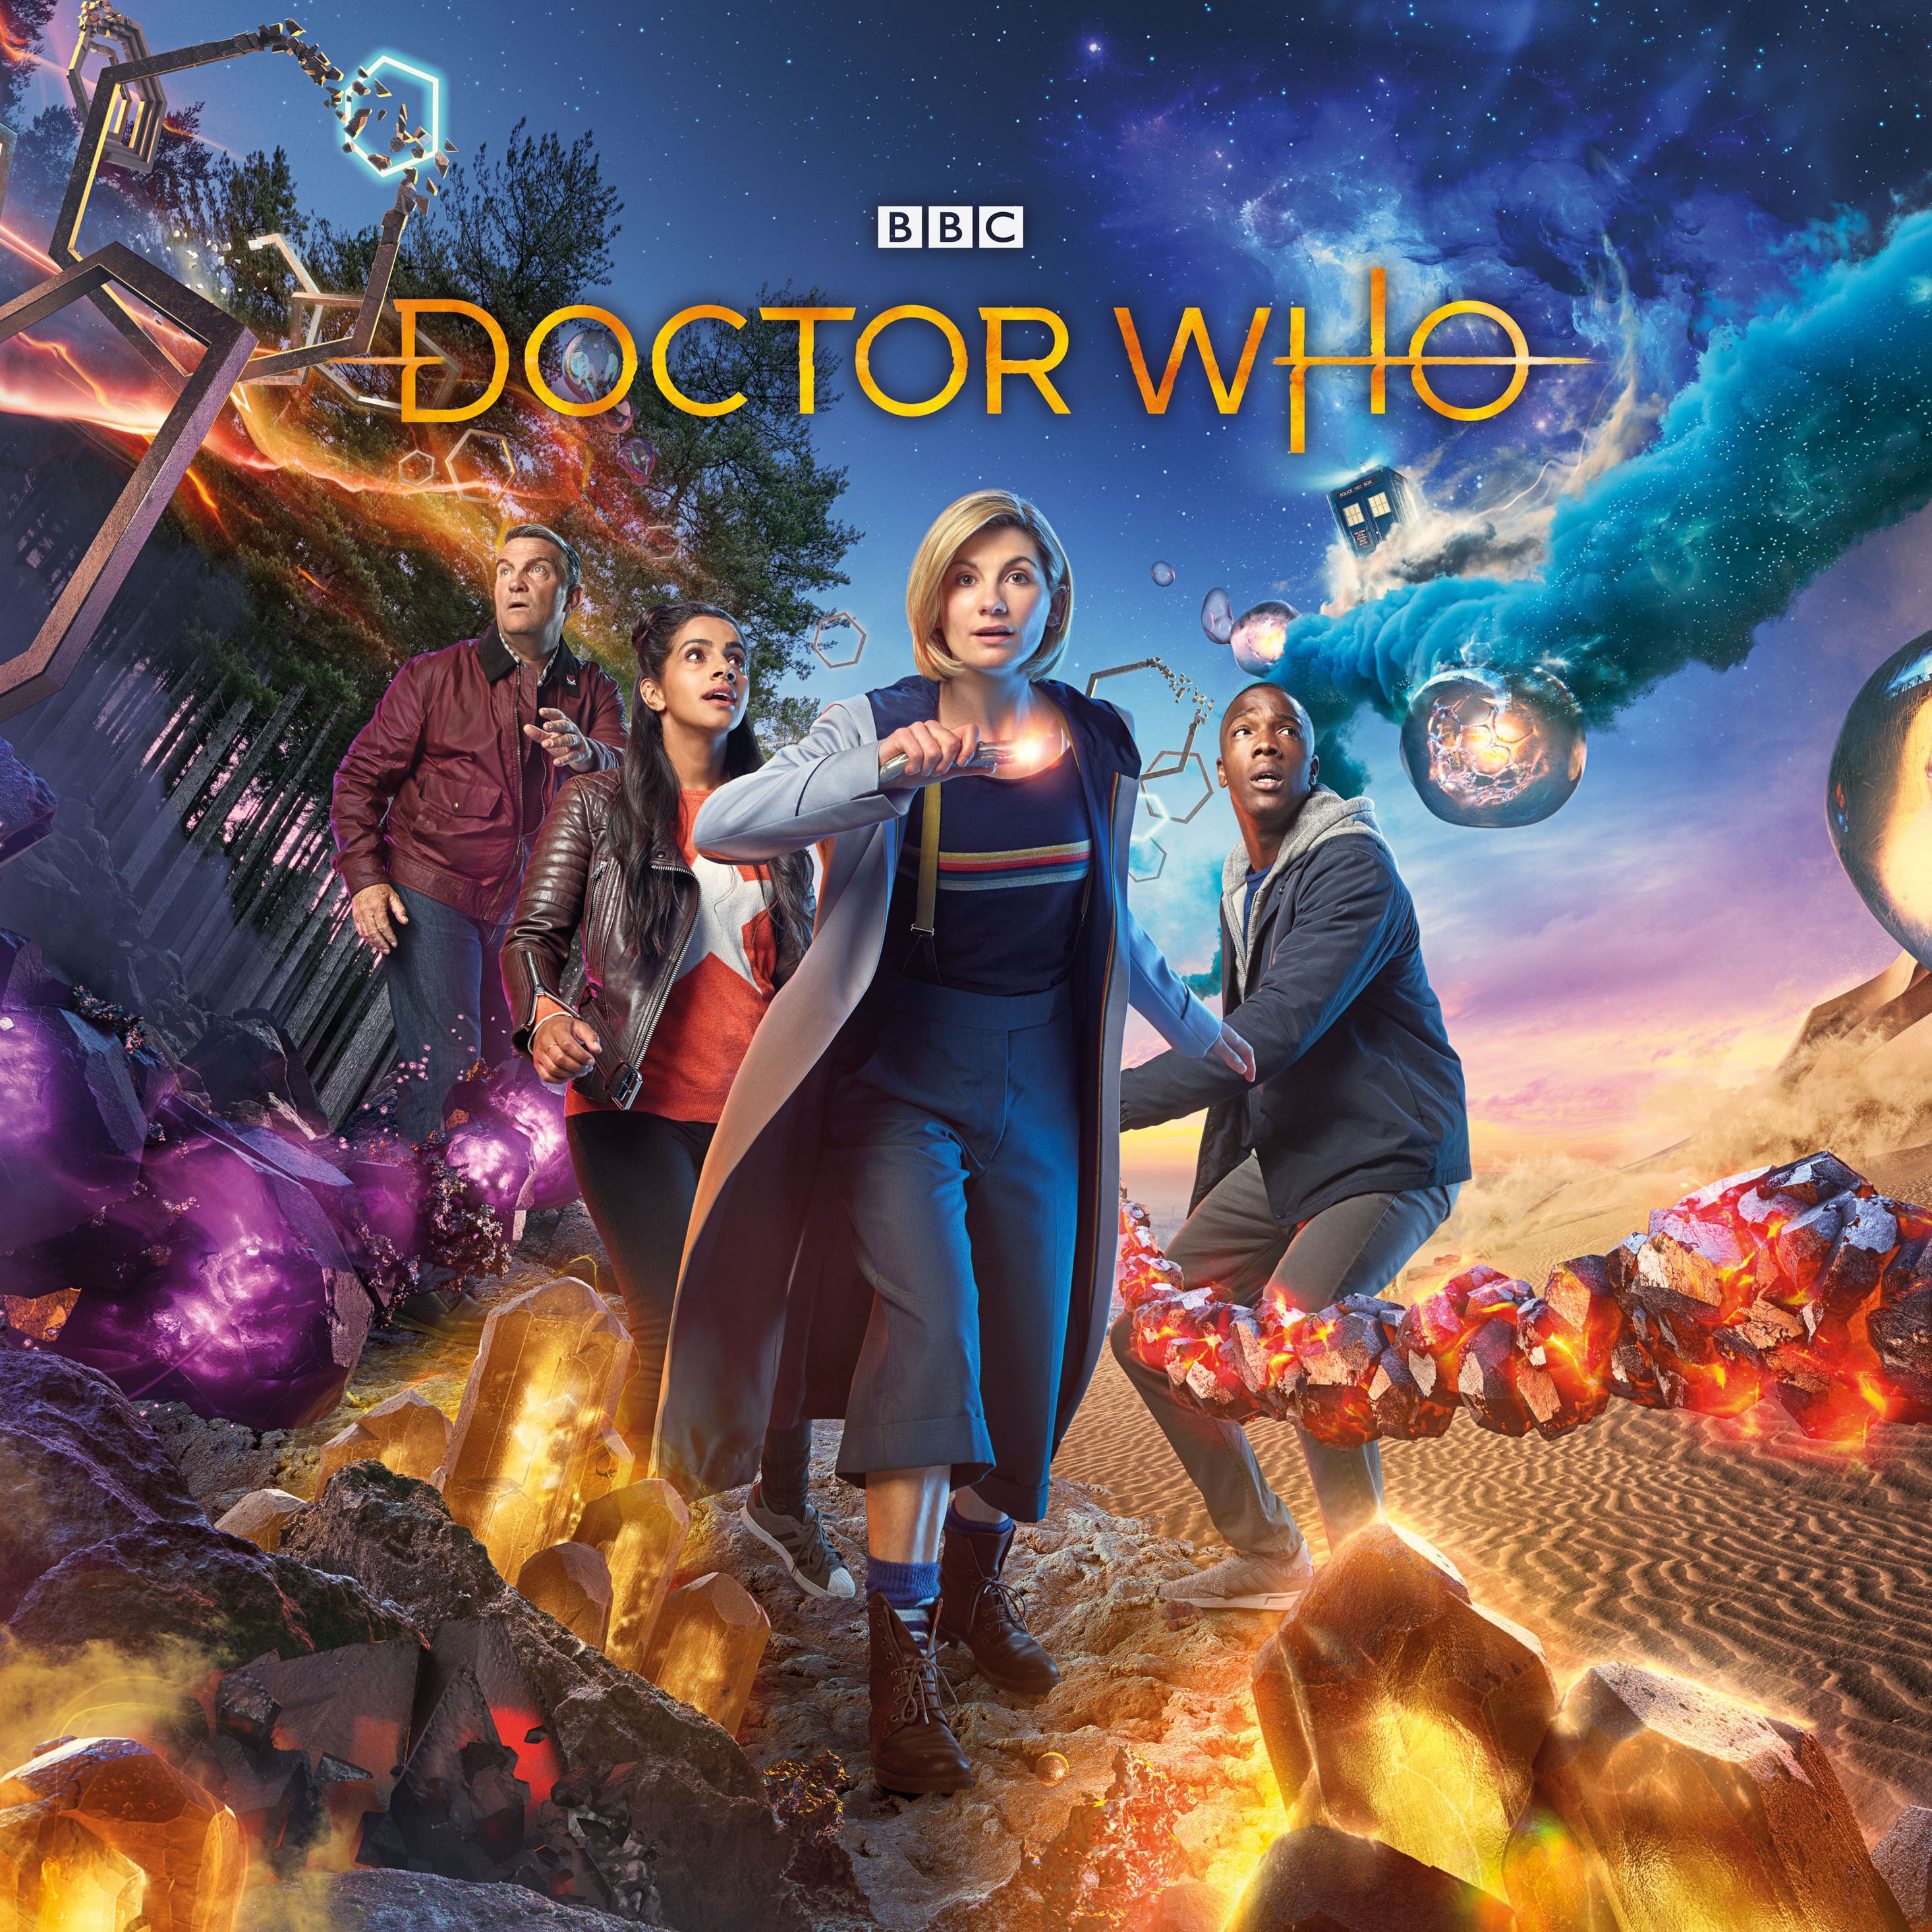 Doctor Who Ipad Wallpapers